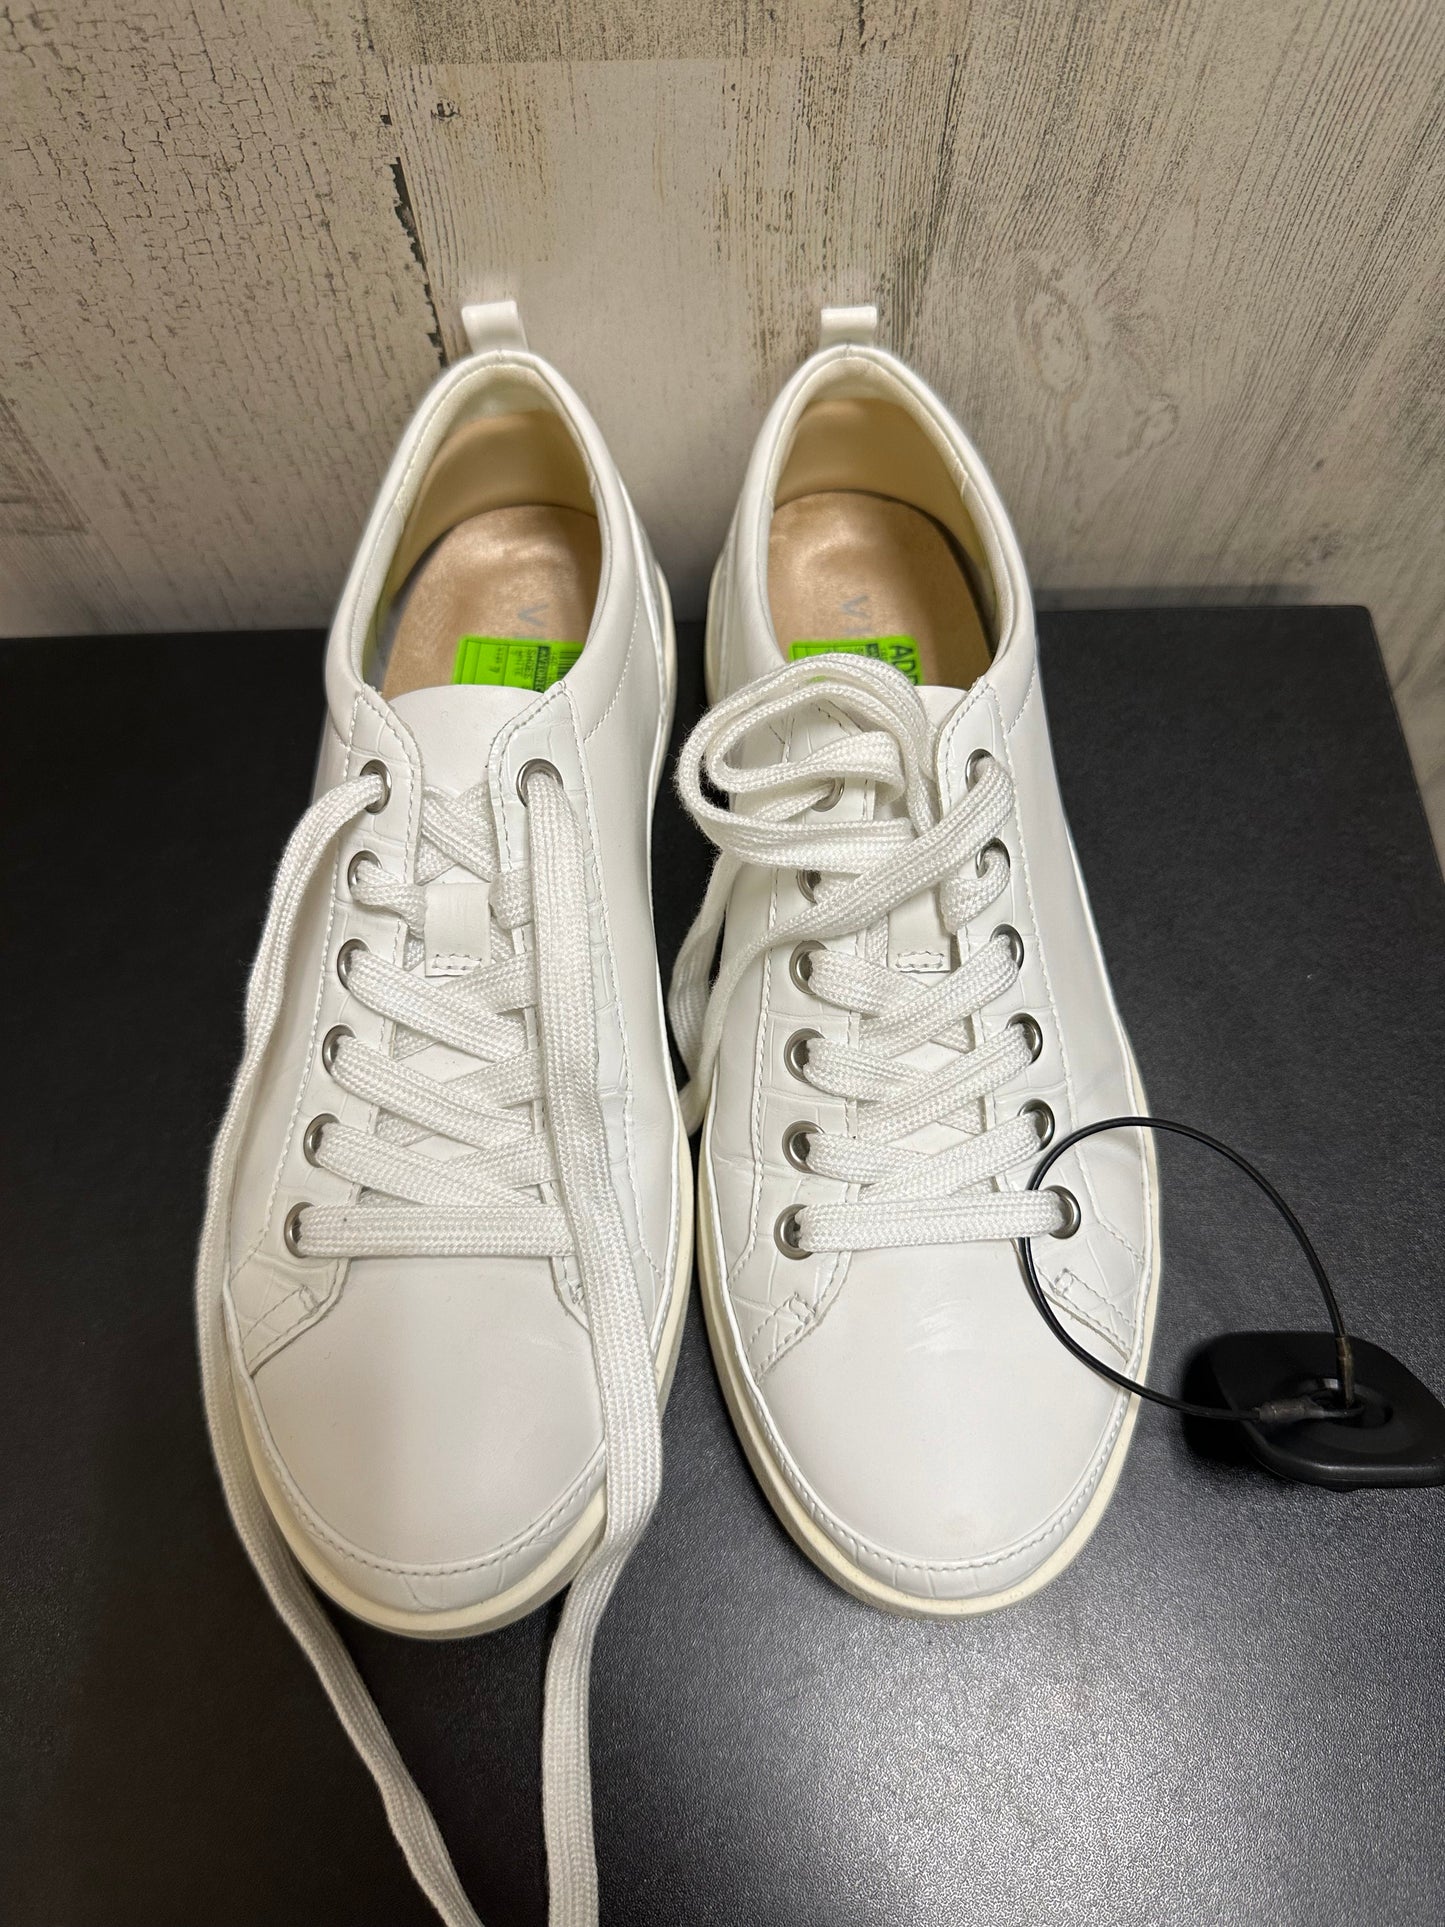 White Shoes Sneakers Vionic, Size 7